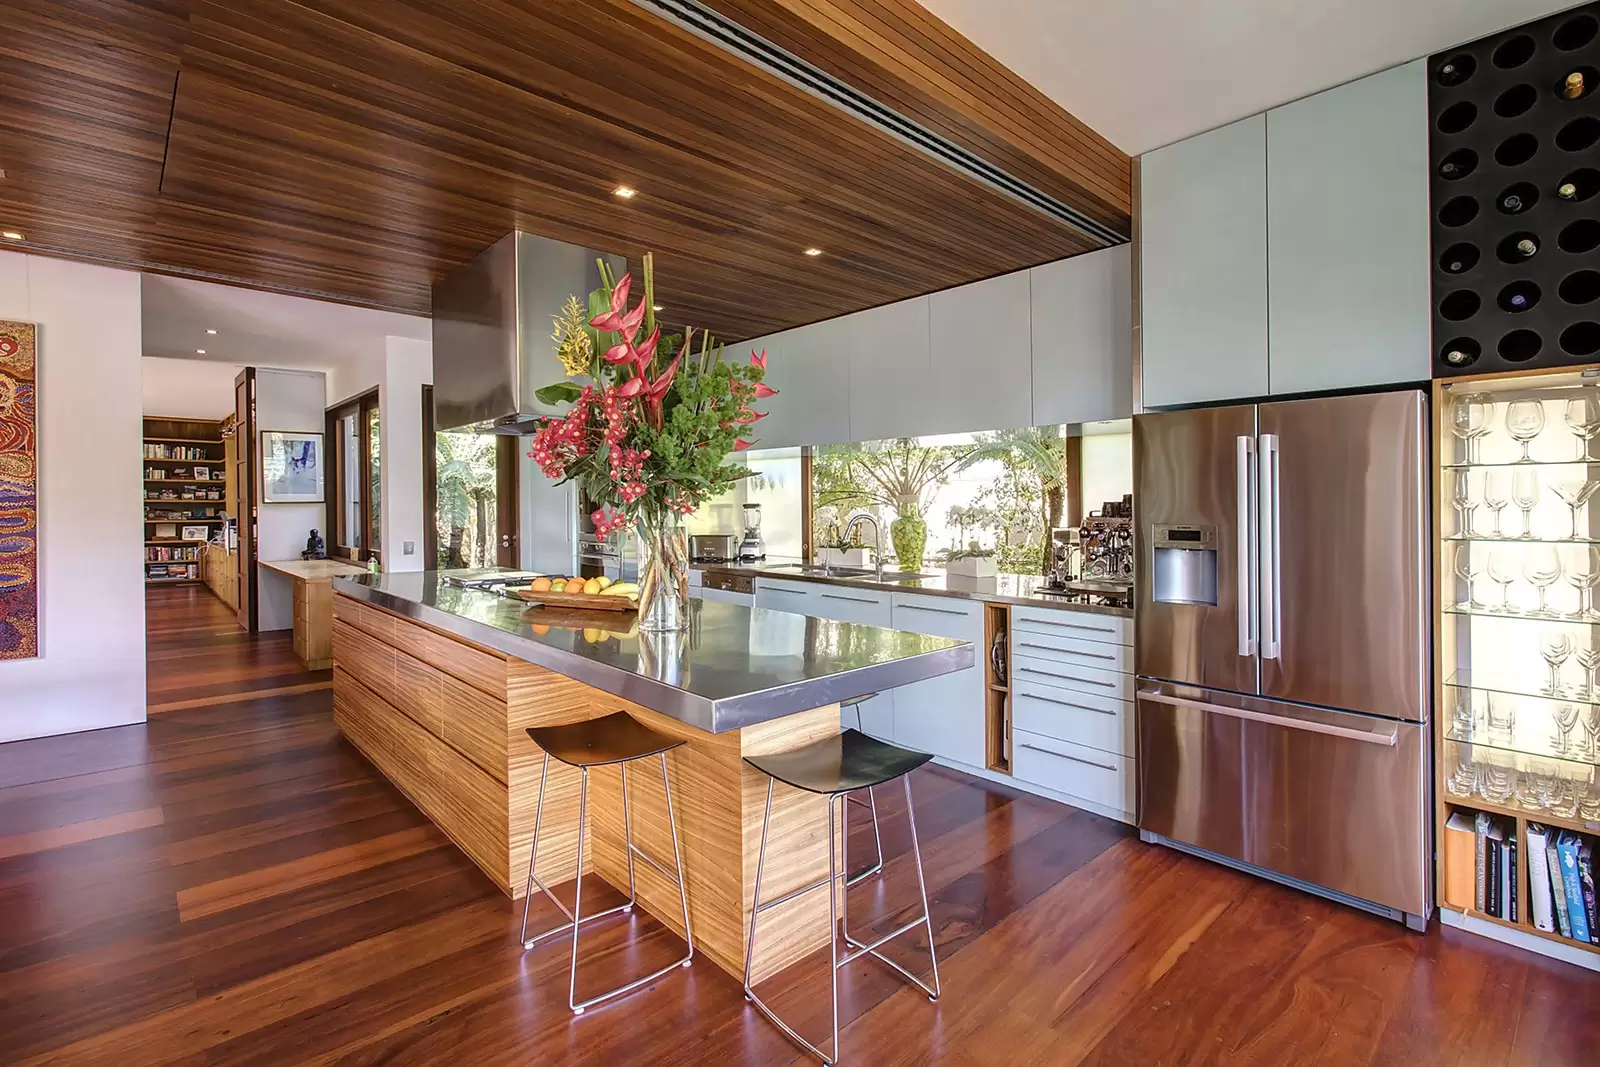 Photo #8: 8 The Crescent, Vaucluse - Sold by Sydney Sotheby's International Realty